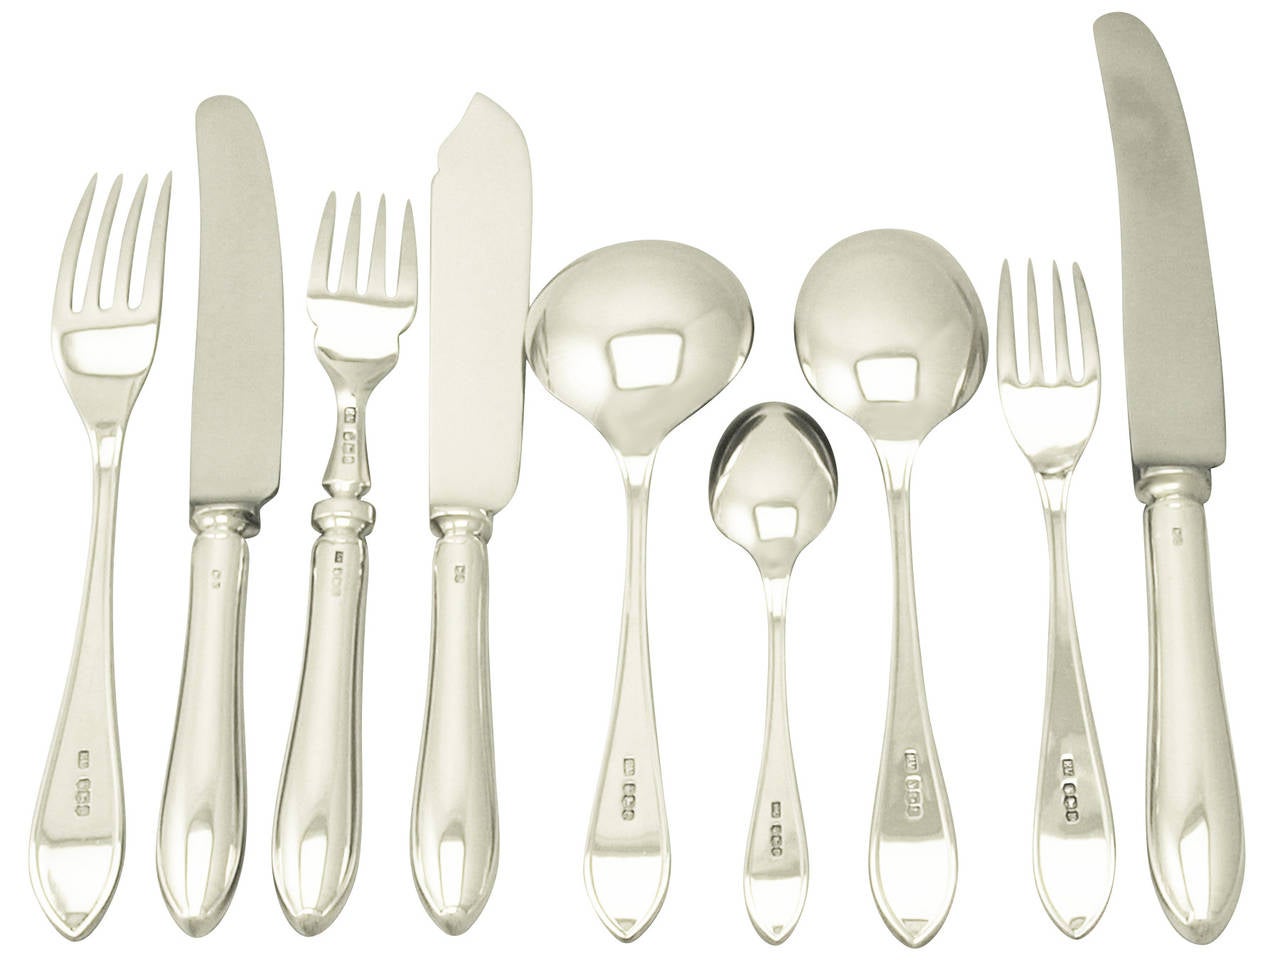 A fine and impressive vintage Elizabeth II English sterling silver straight Sandringham pattern flatware set / service for twelve persons; an addition to our canteen of cutlery collection.

The pieces of this fine, vintage Elizabeth II sterling